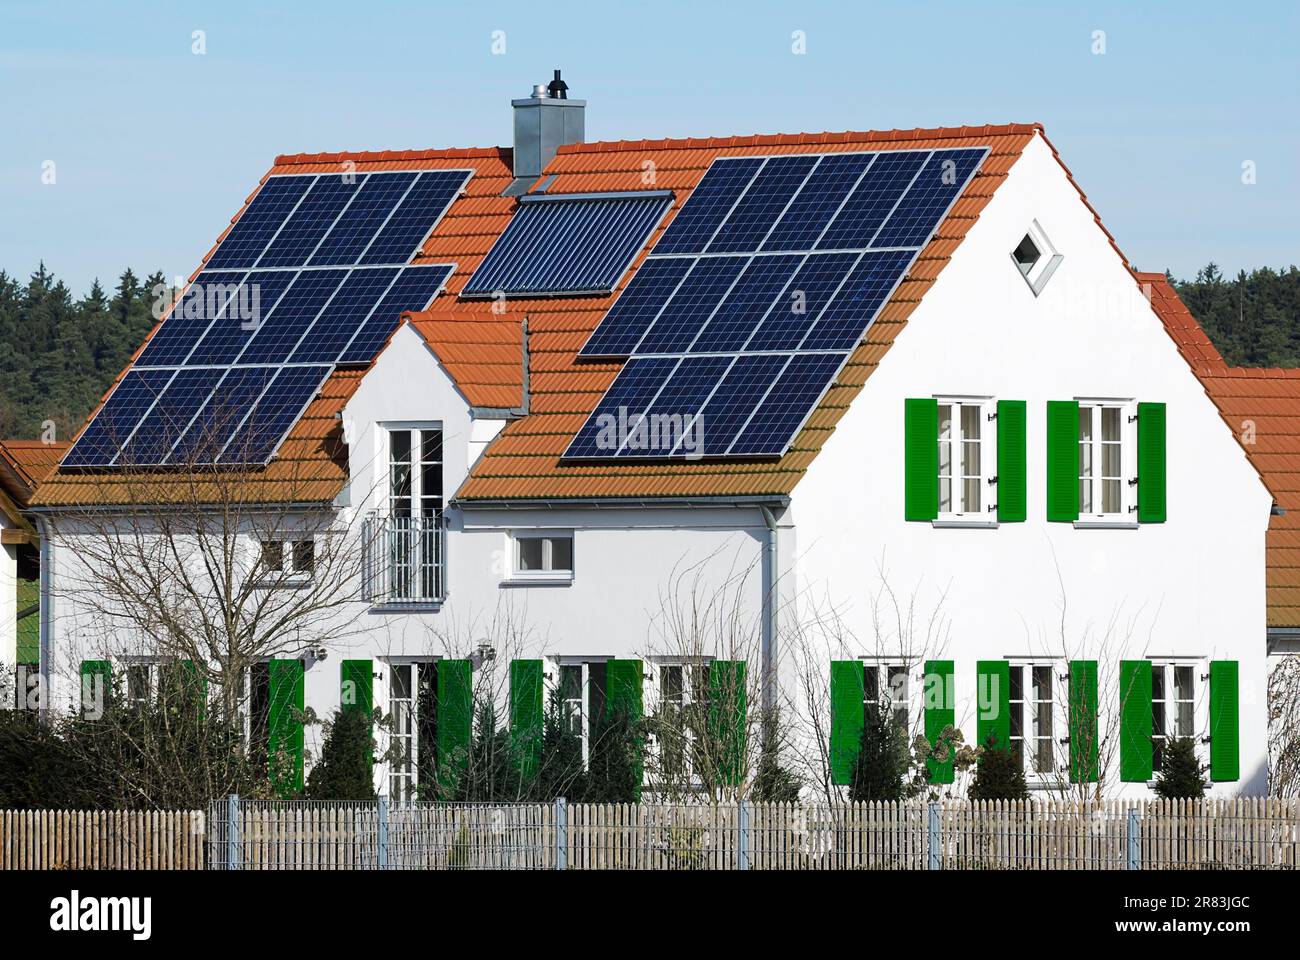 Photovoltaic and solar heating system at a house Stock Photo